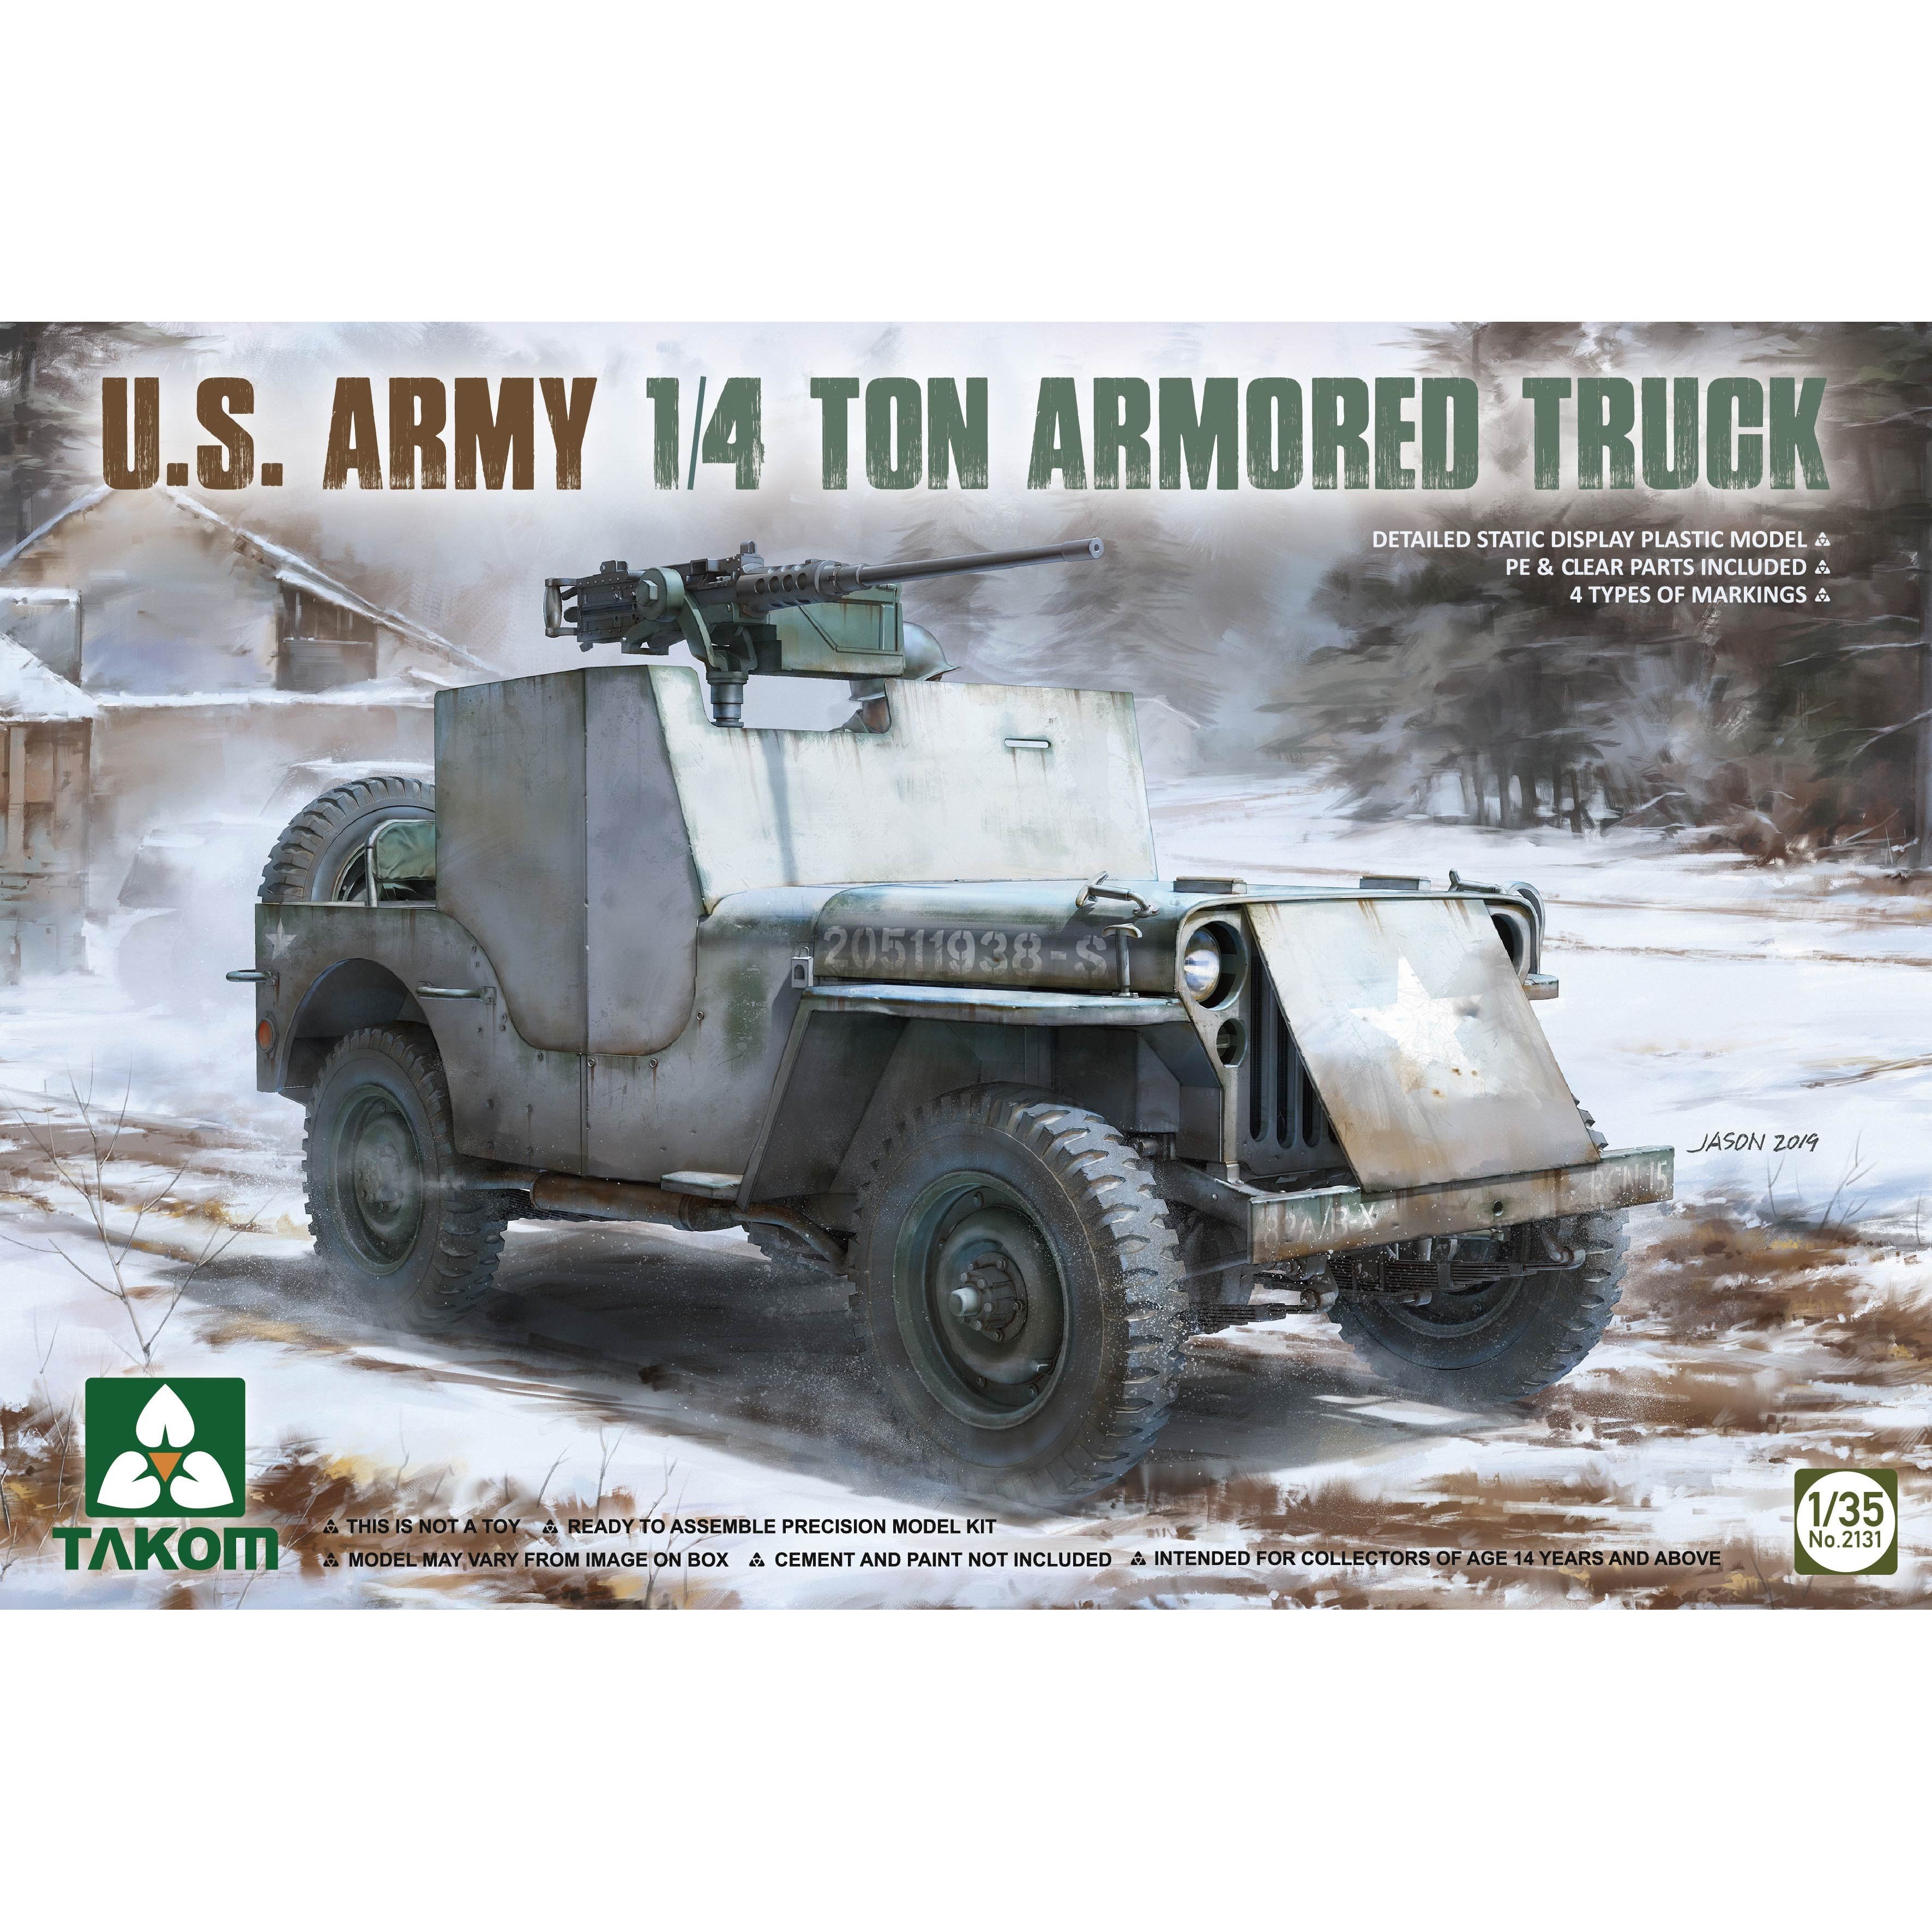 US Army 1/4 Ton Armored Truck 1/35 by Takom